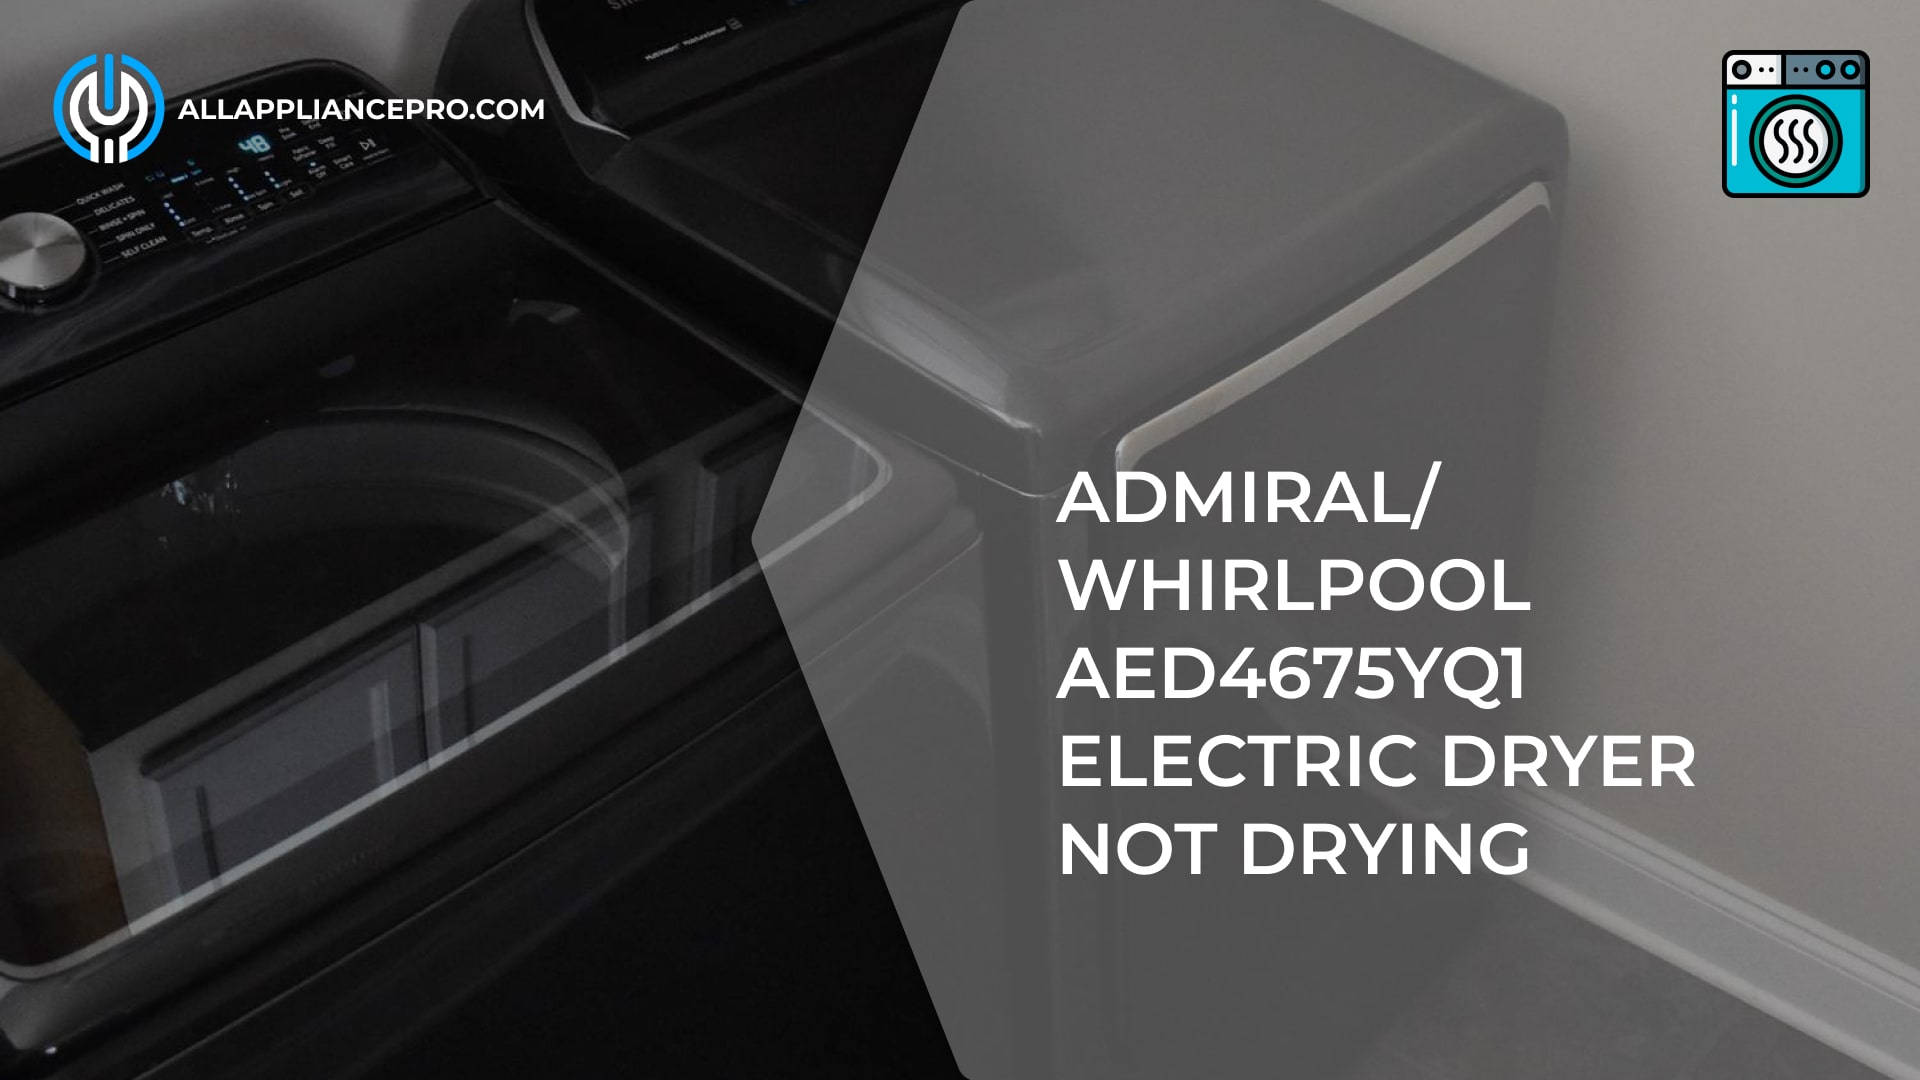 Admiral/Whirlpool AED4675YQ1 Electric Dryer Not Drying 